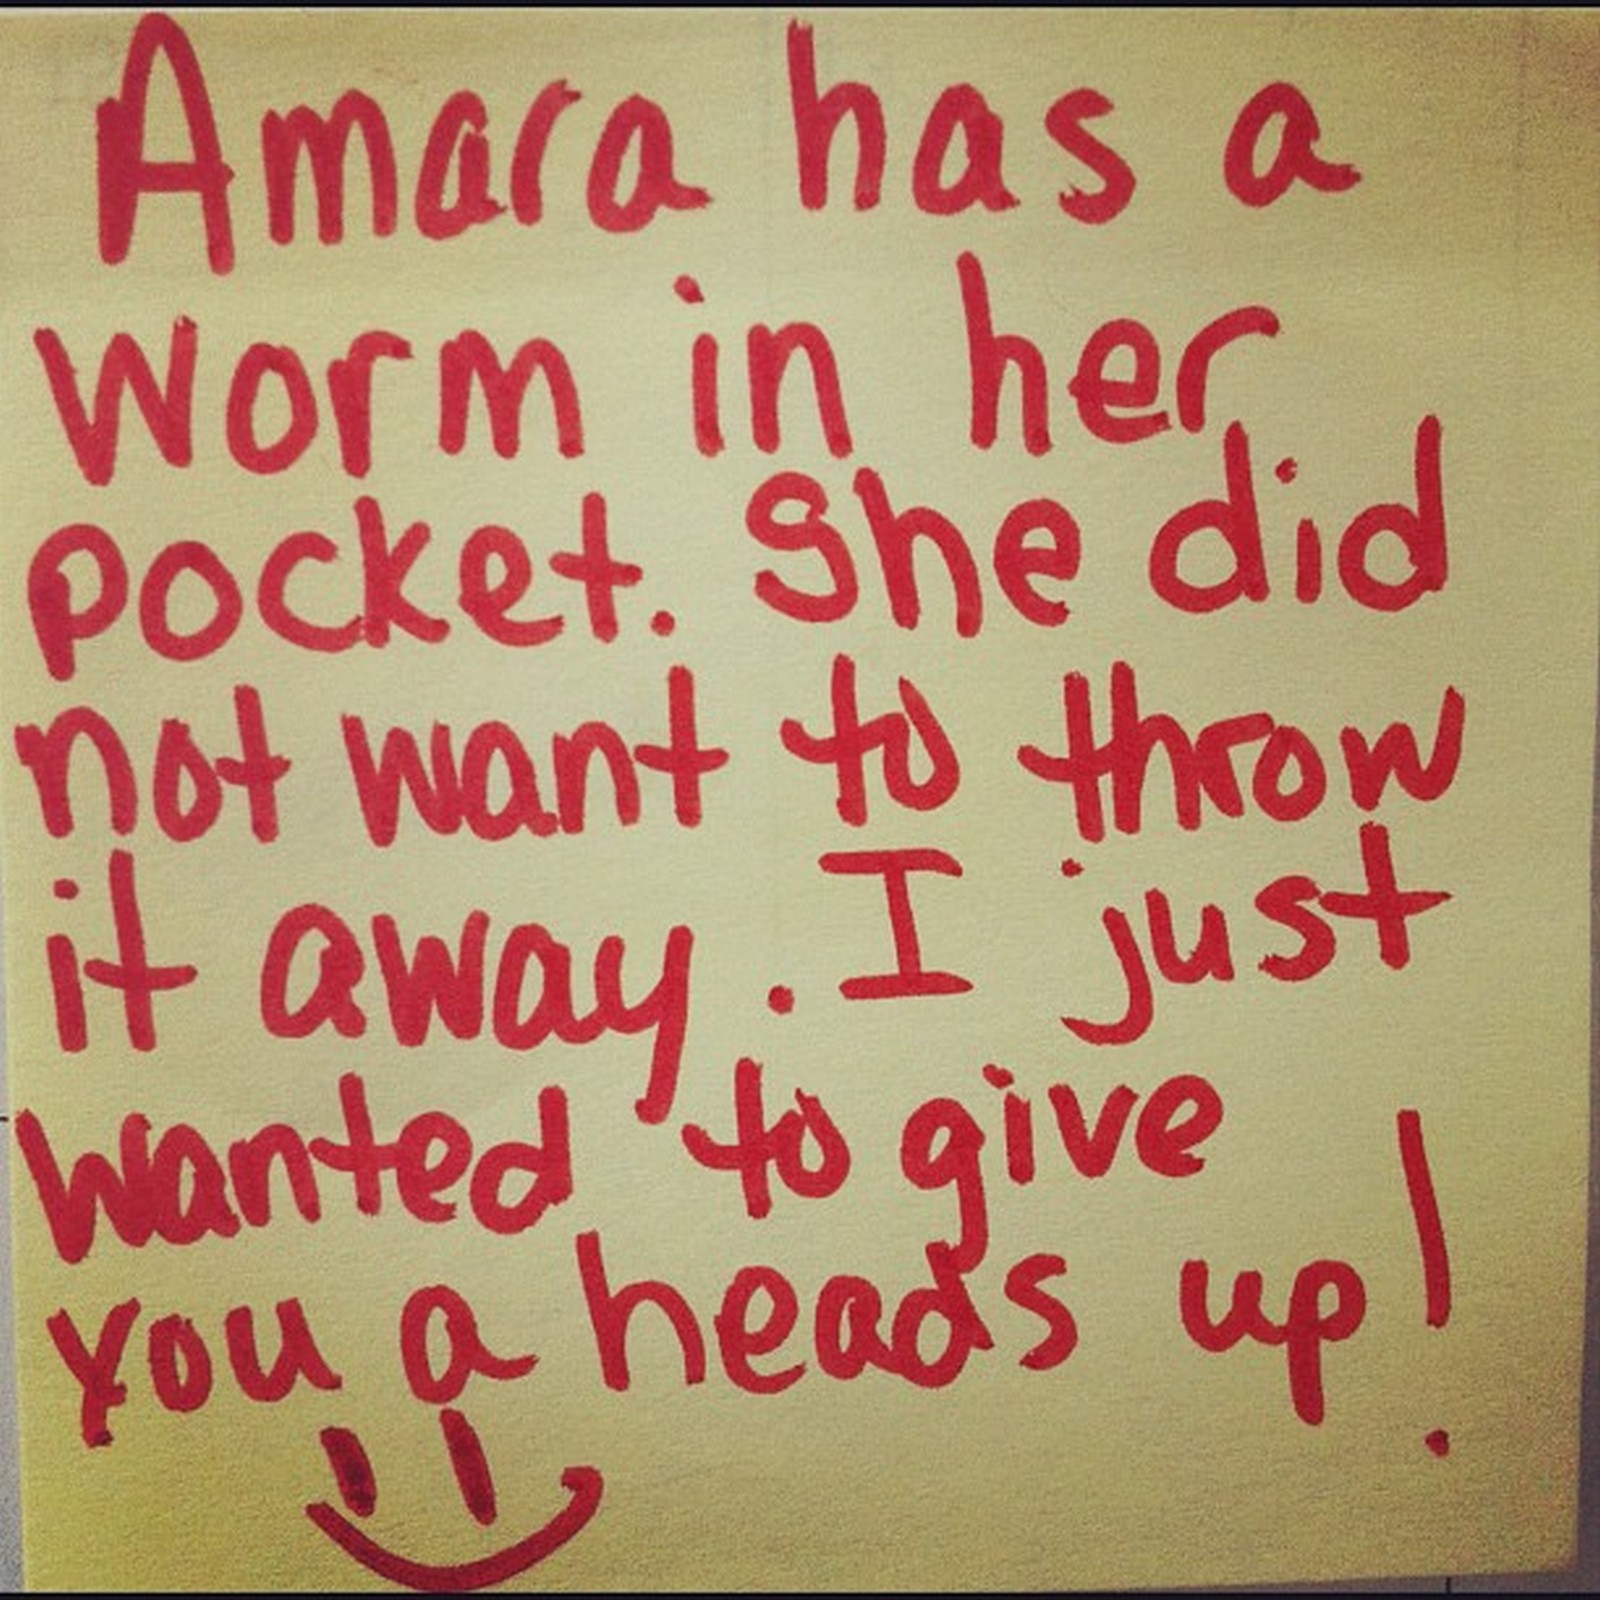 17 Teacher Notes - I hope the worm in her pocket was found before laundry day.